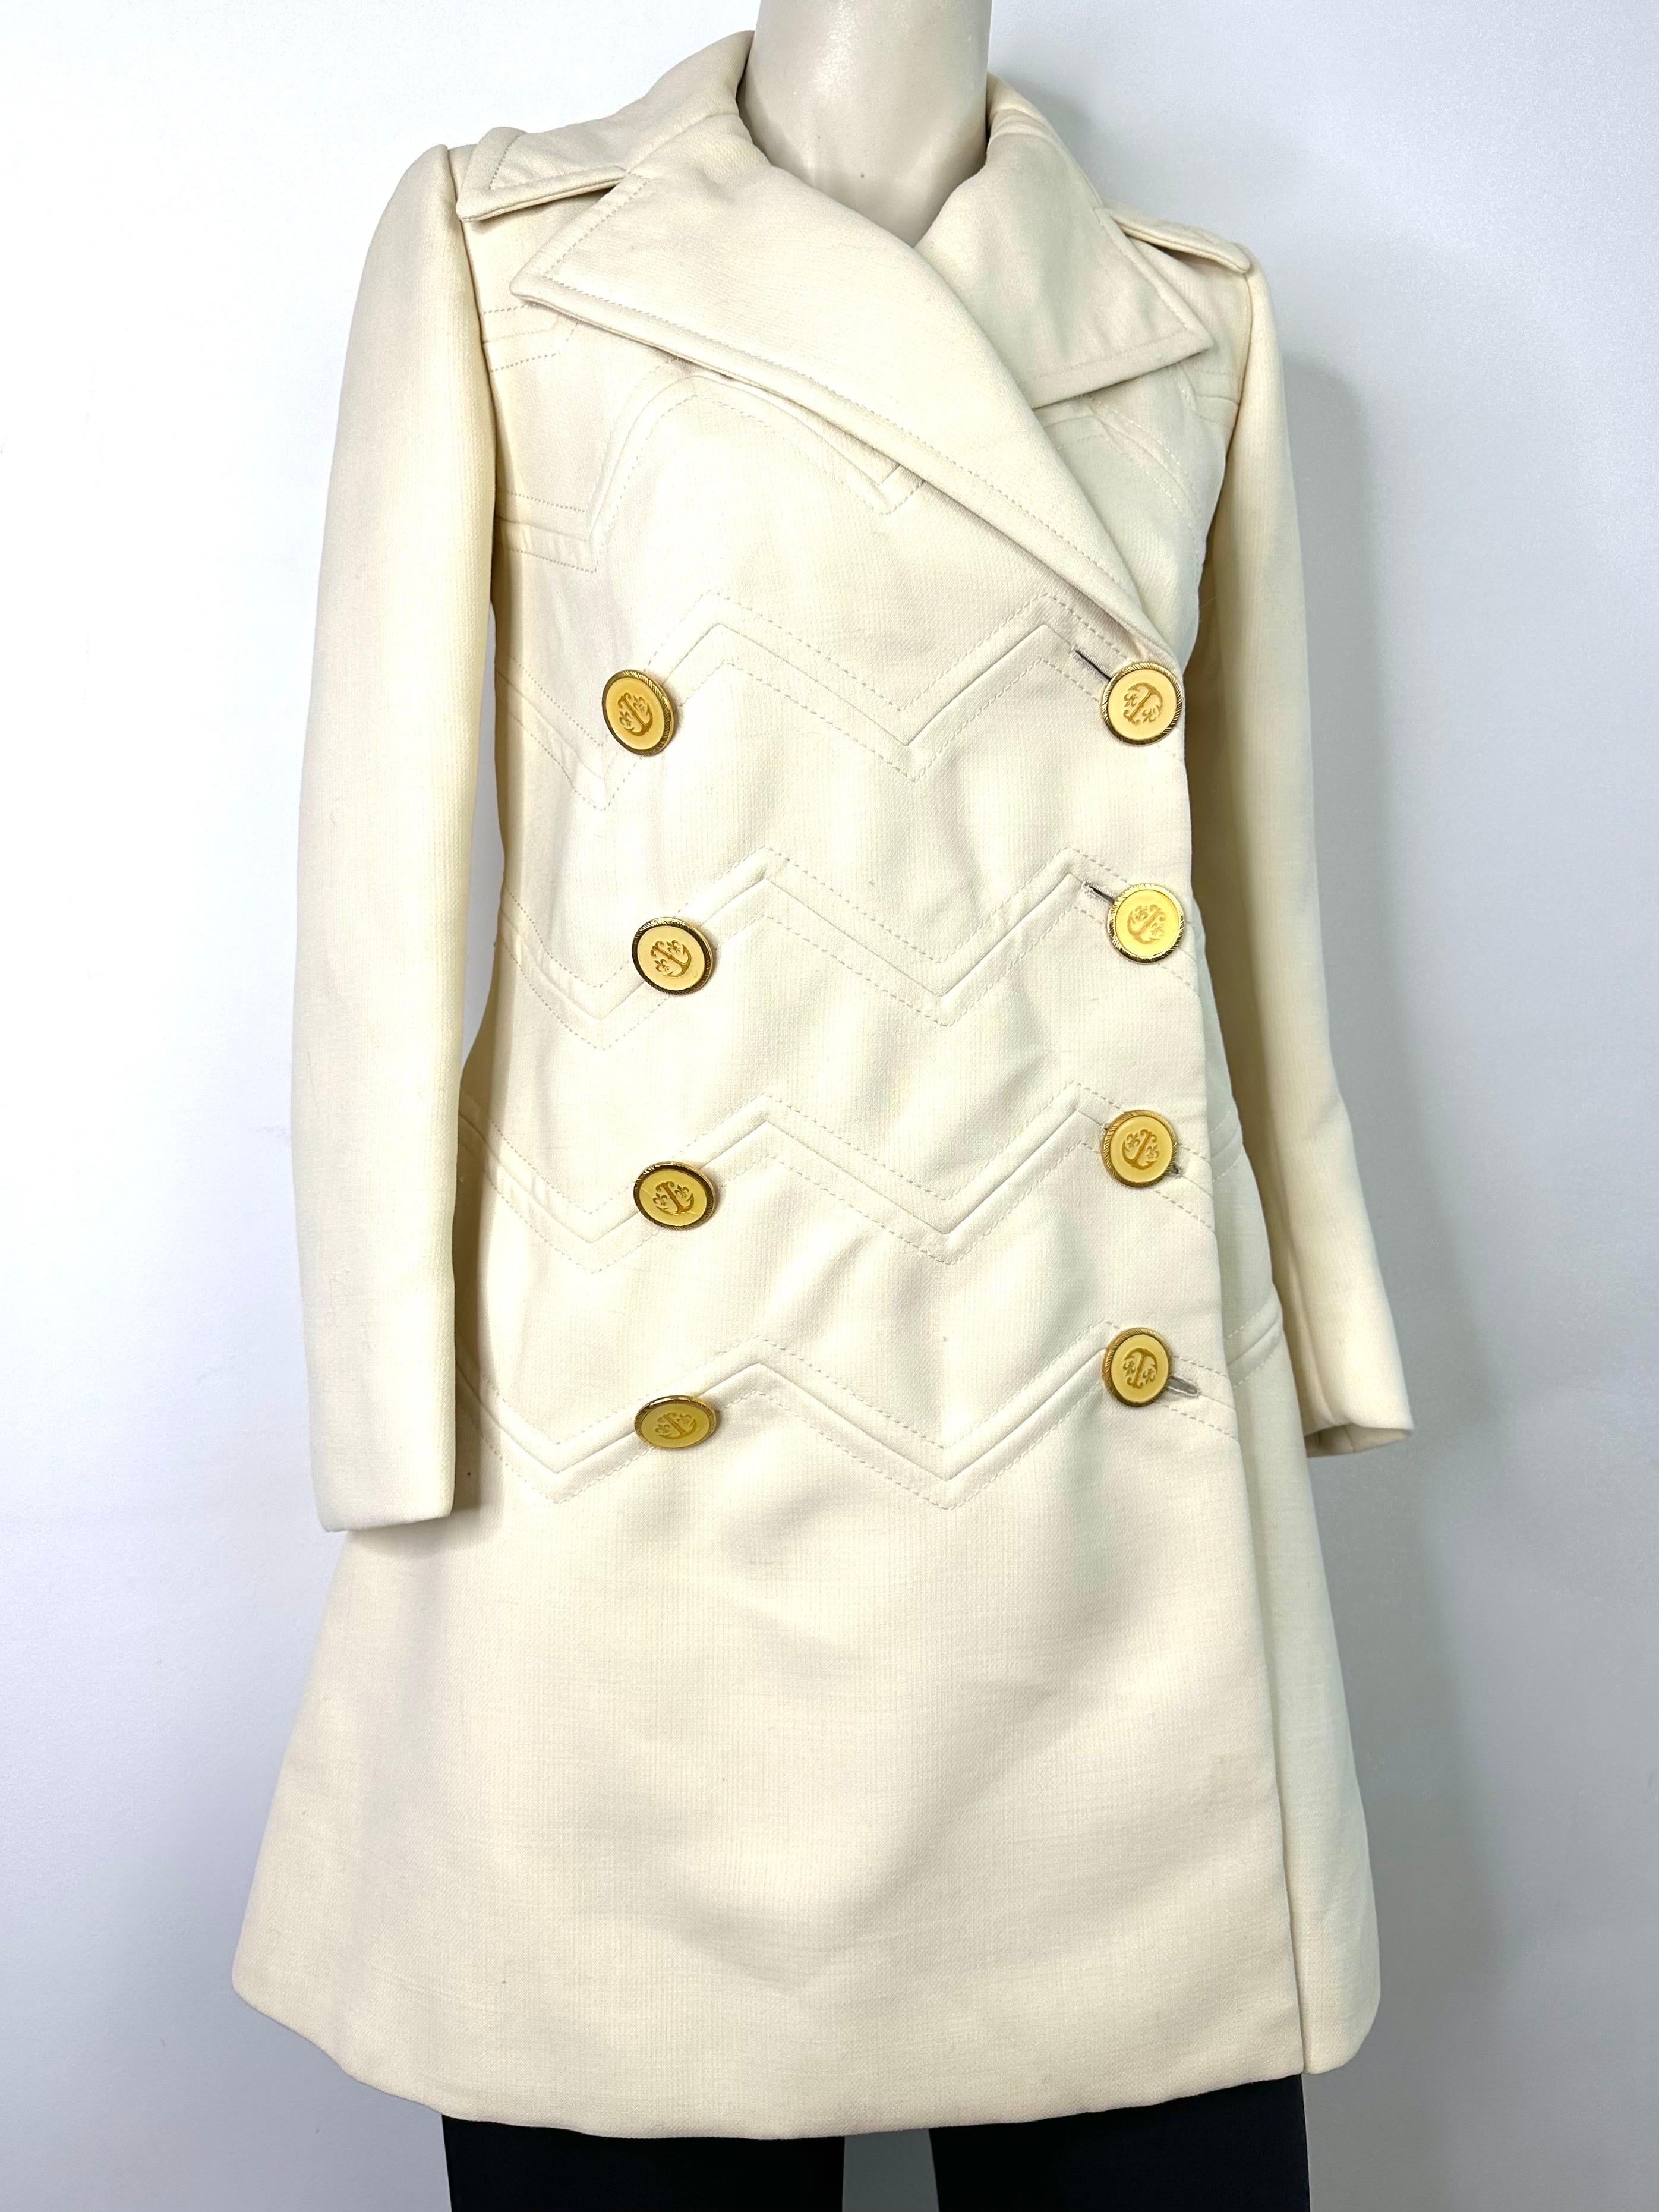 Ted Lapidus 1960s vintage pea jacket, slim-fit
Ivory wool, wide collars,
Double-breasted buttoning with handsome, imposing buttons encircled with gold Ted Lapidus metal.
Hip pockets in the seam.
Chevron stitching detail and wide